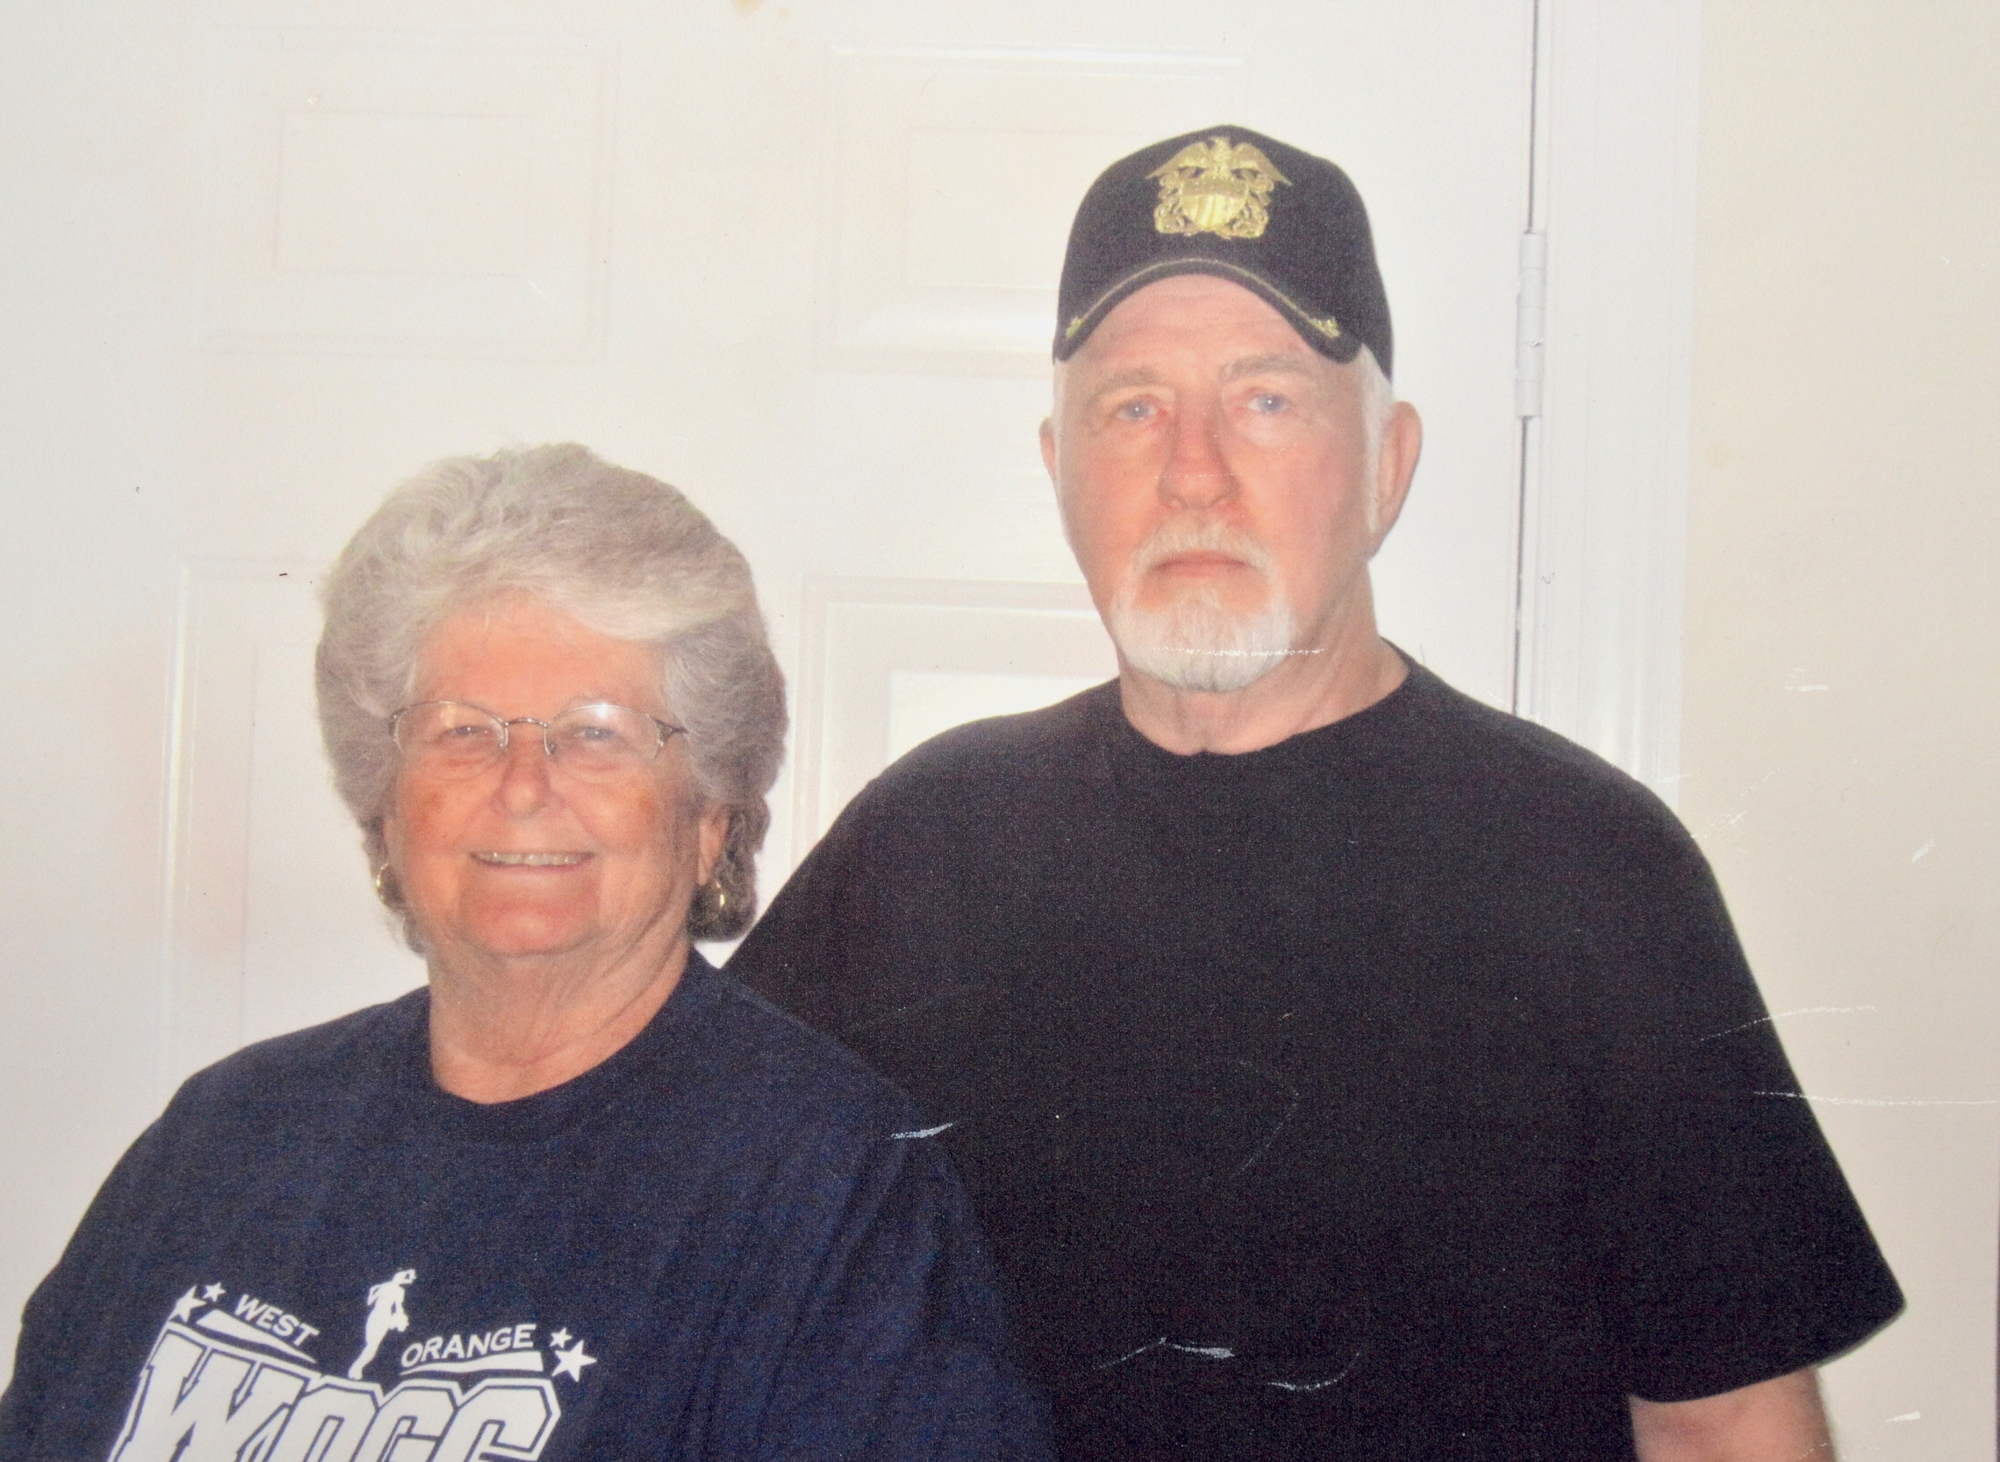 Merle and Ed Decker in a recent photograph.